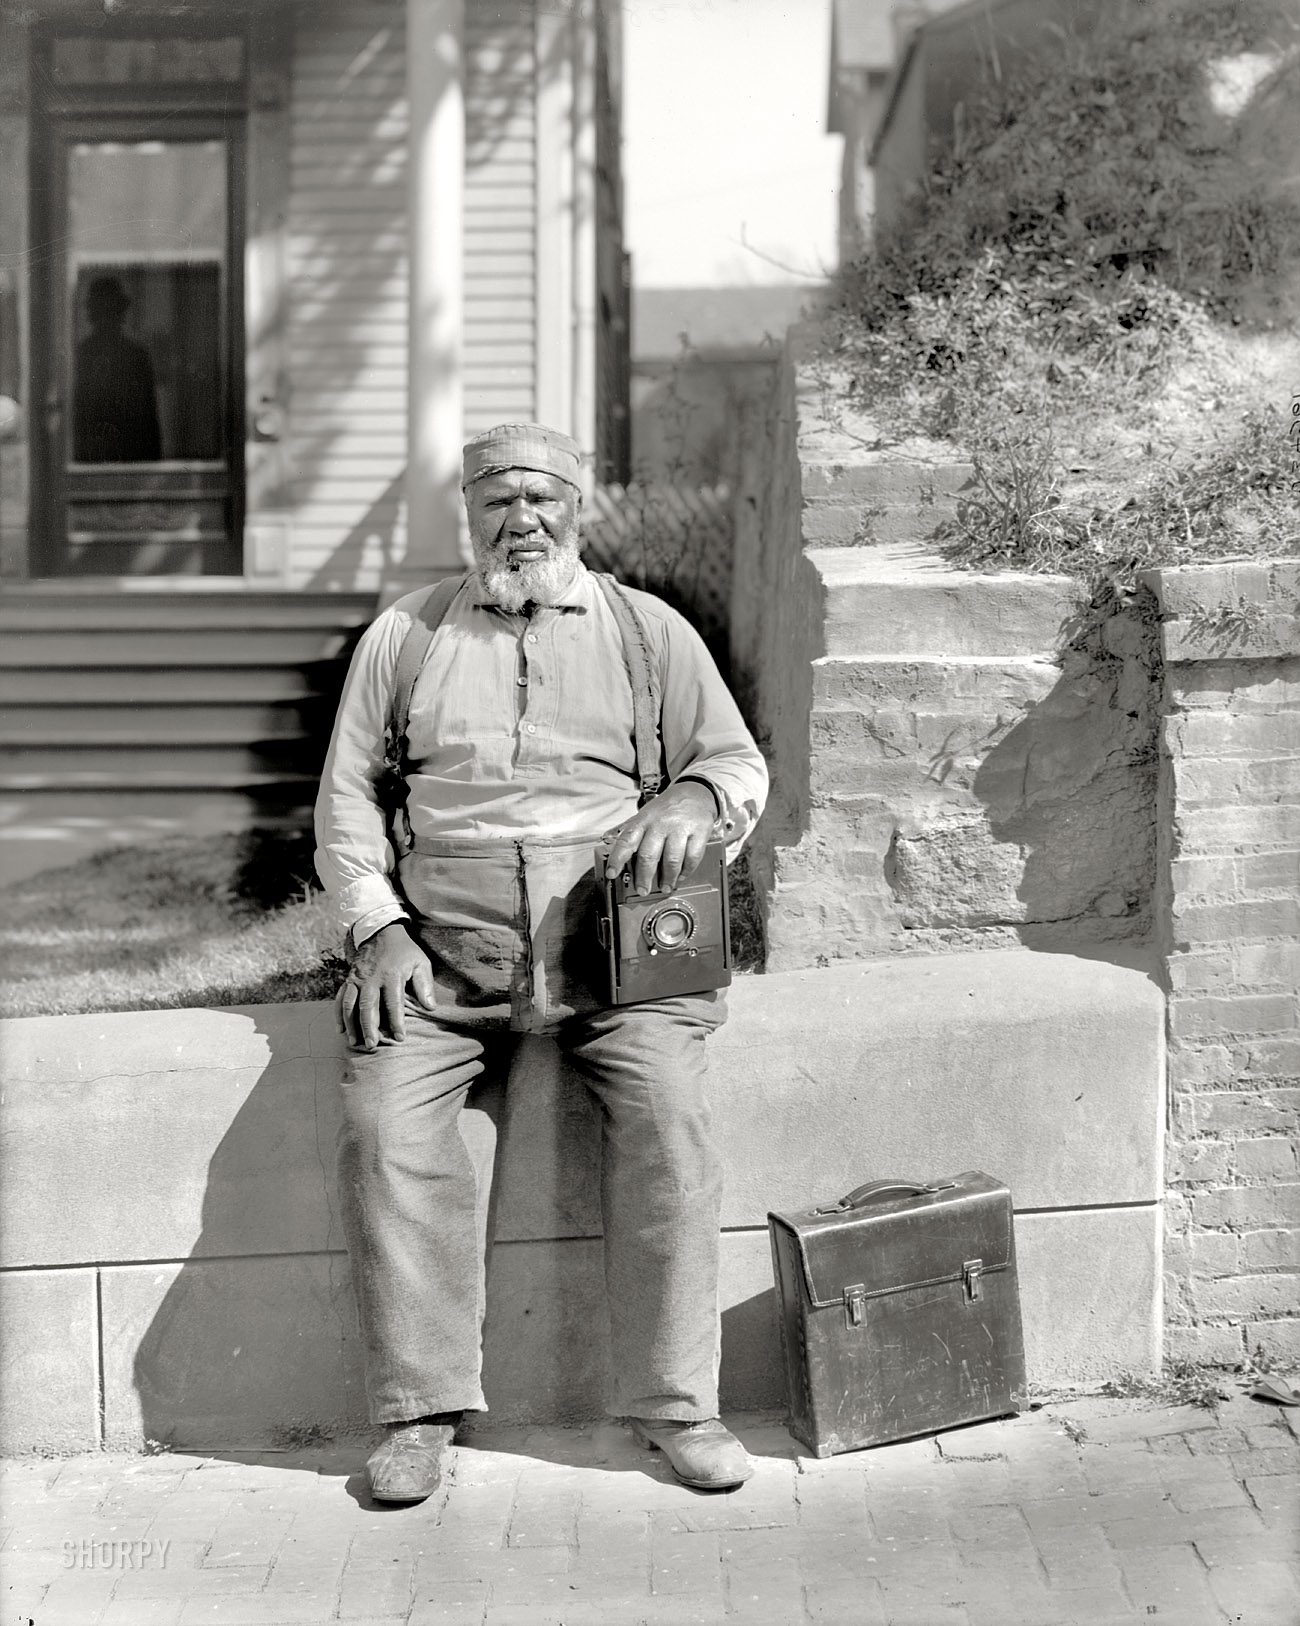 Old Orchard, Maine, circa 1904. "Photographer at Old Orchard House." 8x10 inch dry plate glass negative, Detroit Publishing Company. View full size.